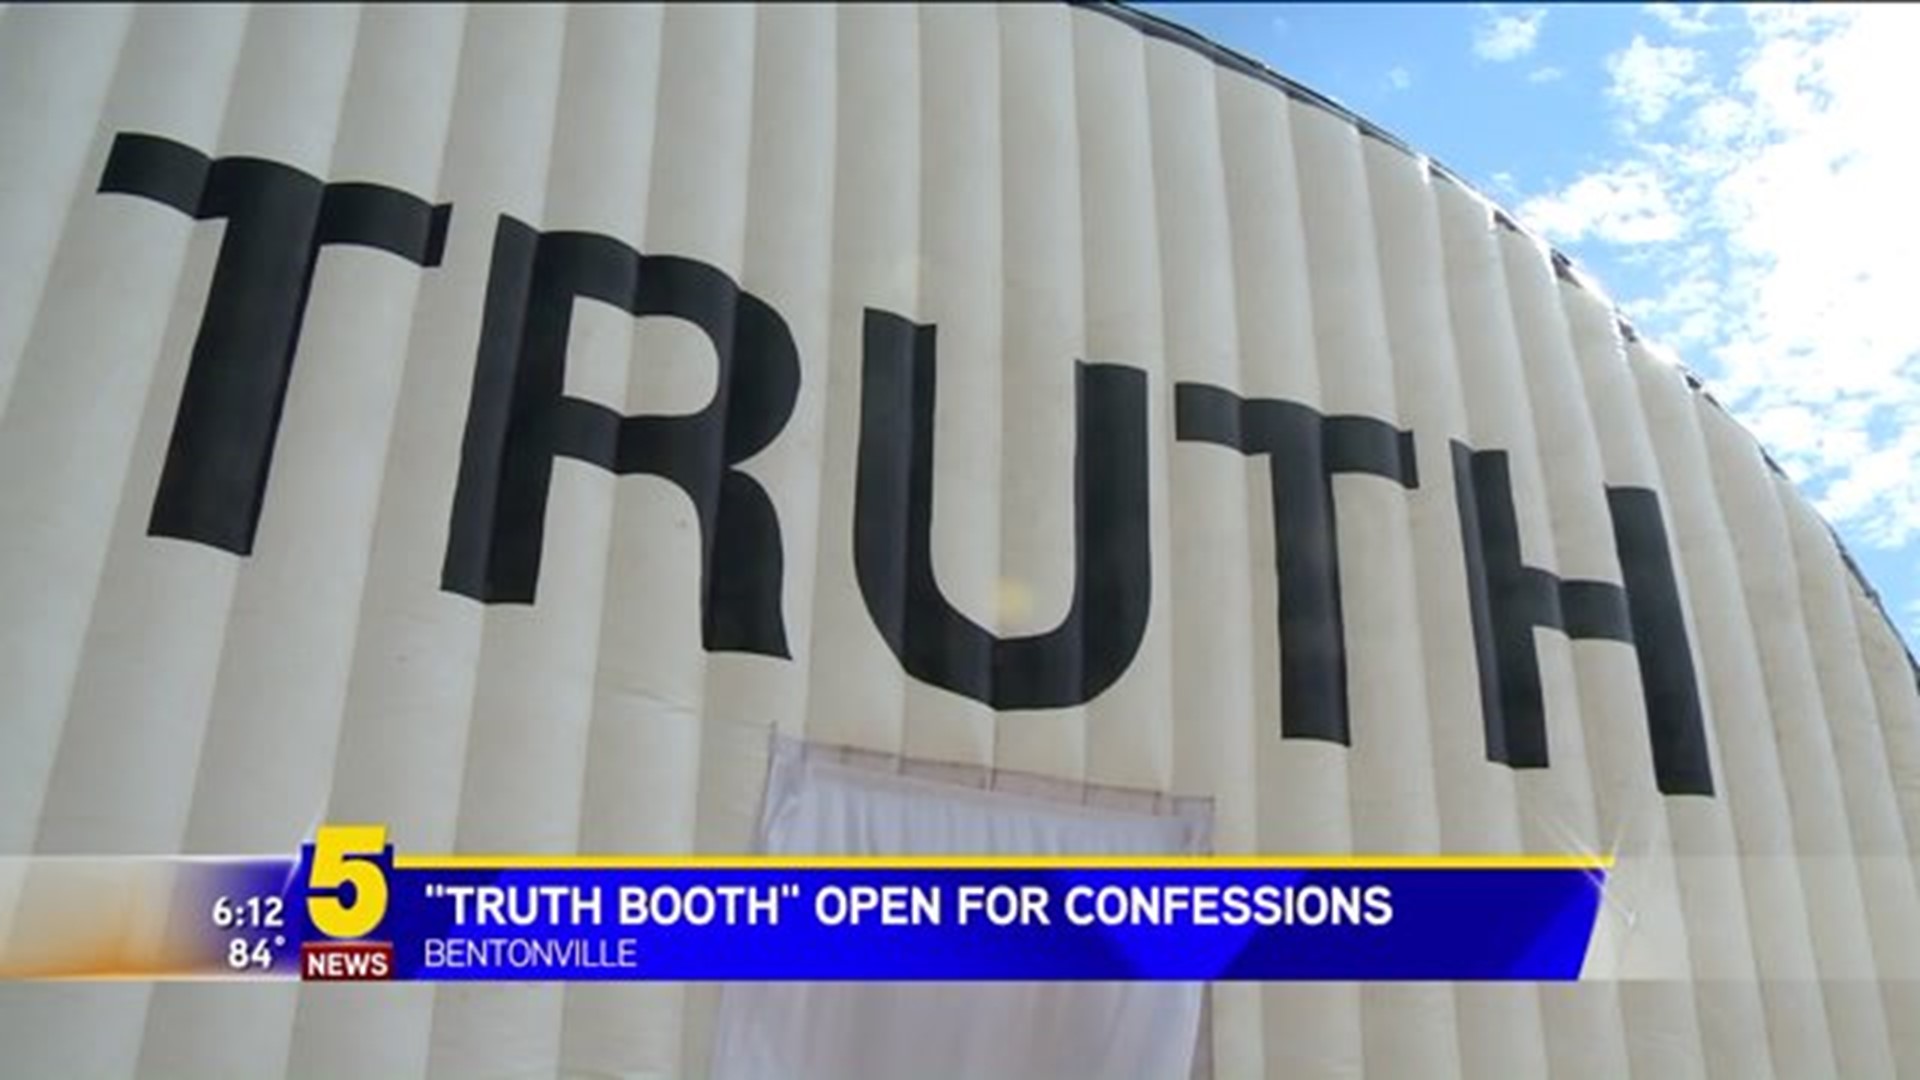 "Truth Booth" Open For Confessions